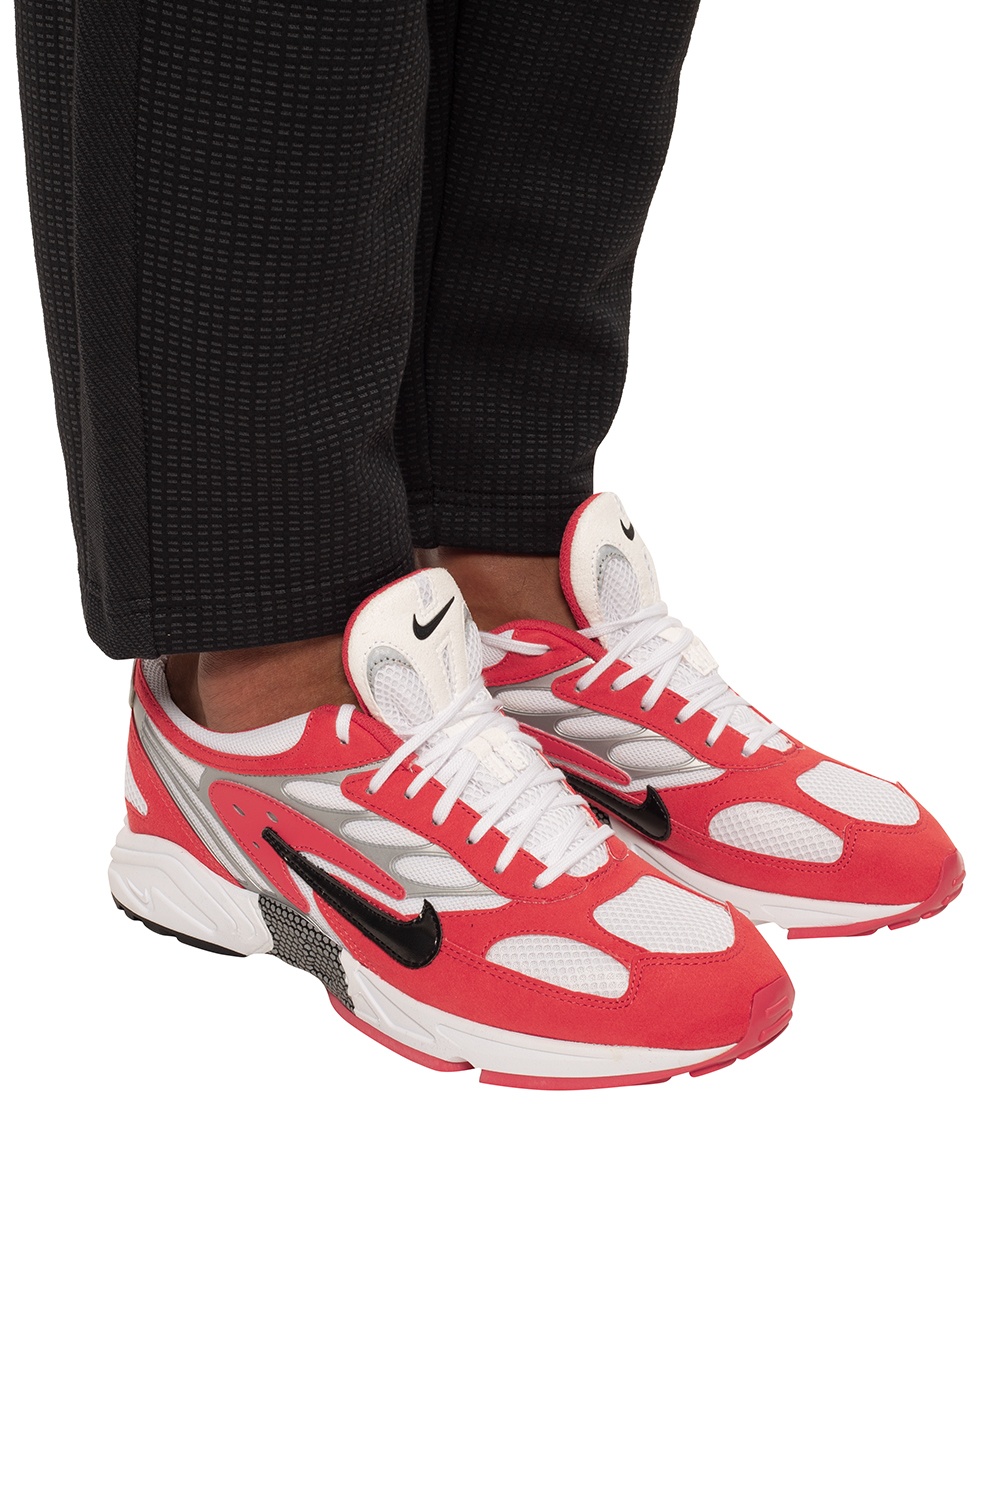 nike ghost racer red